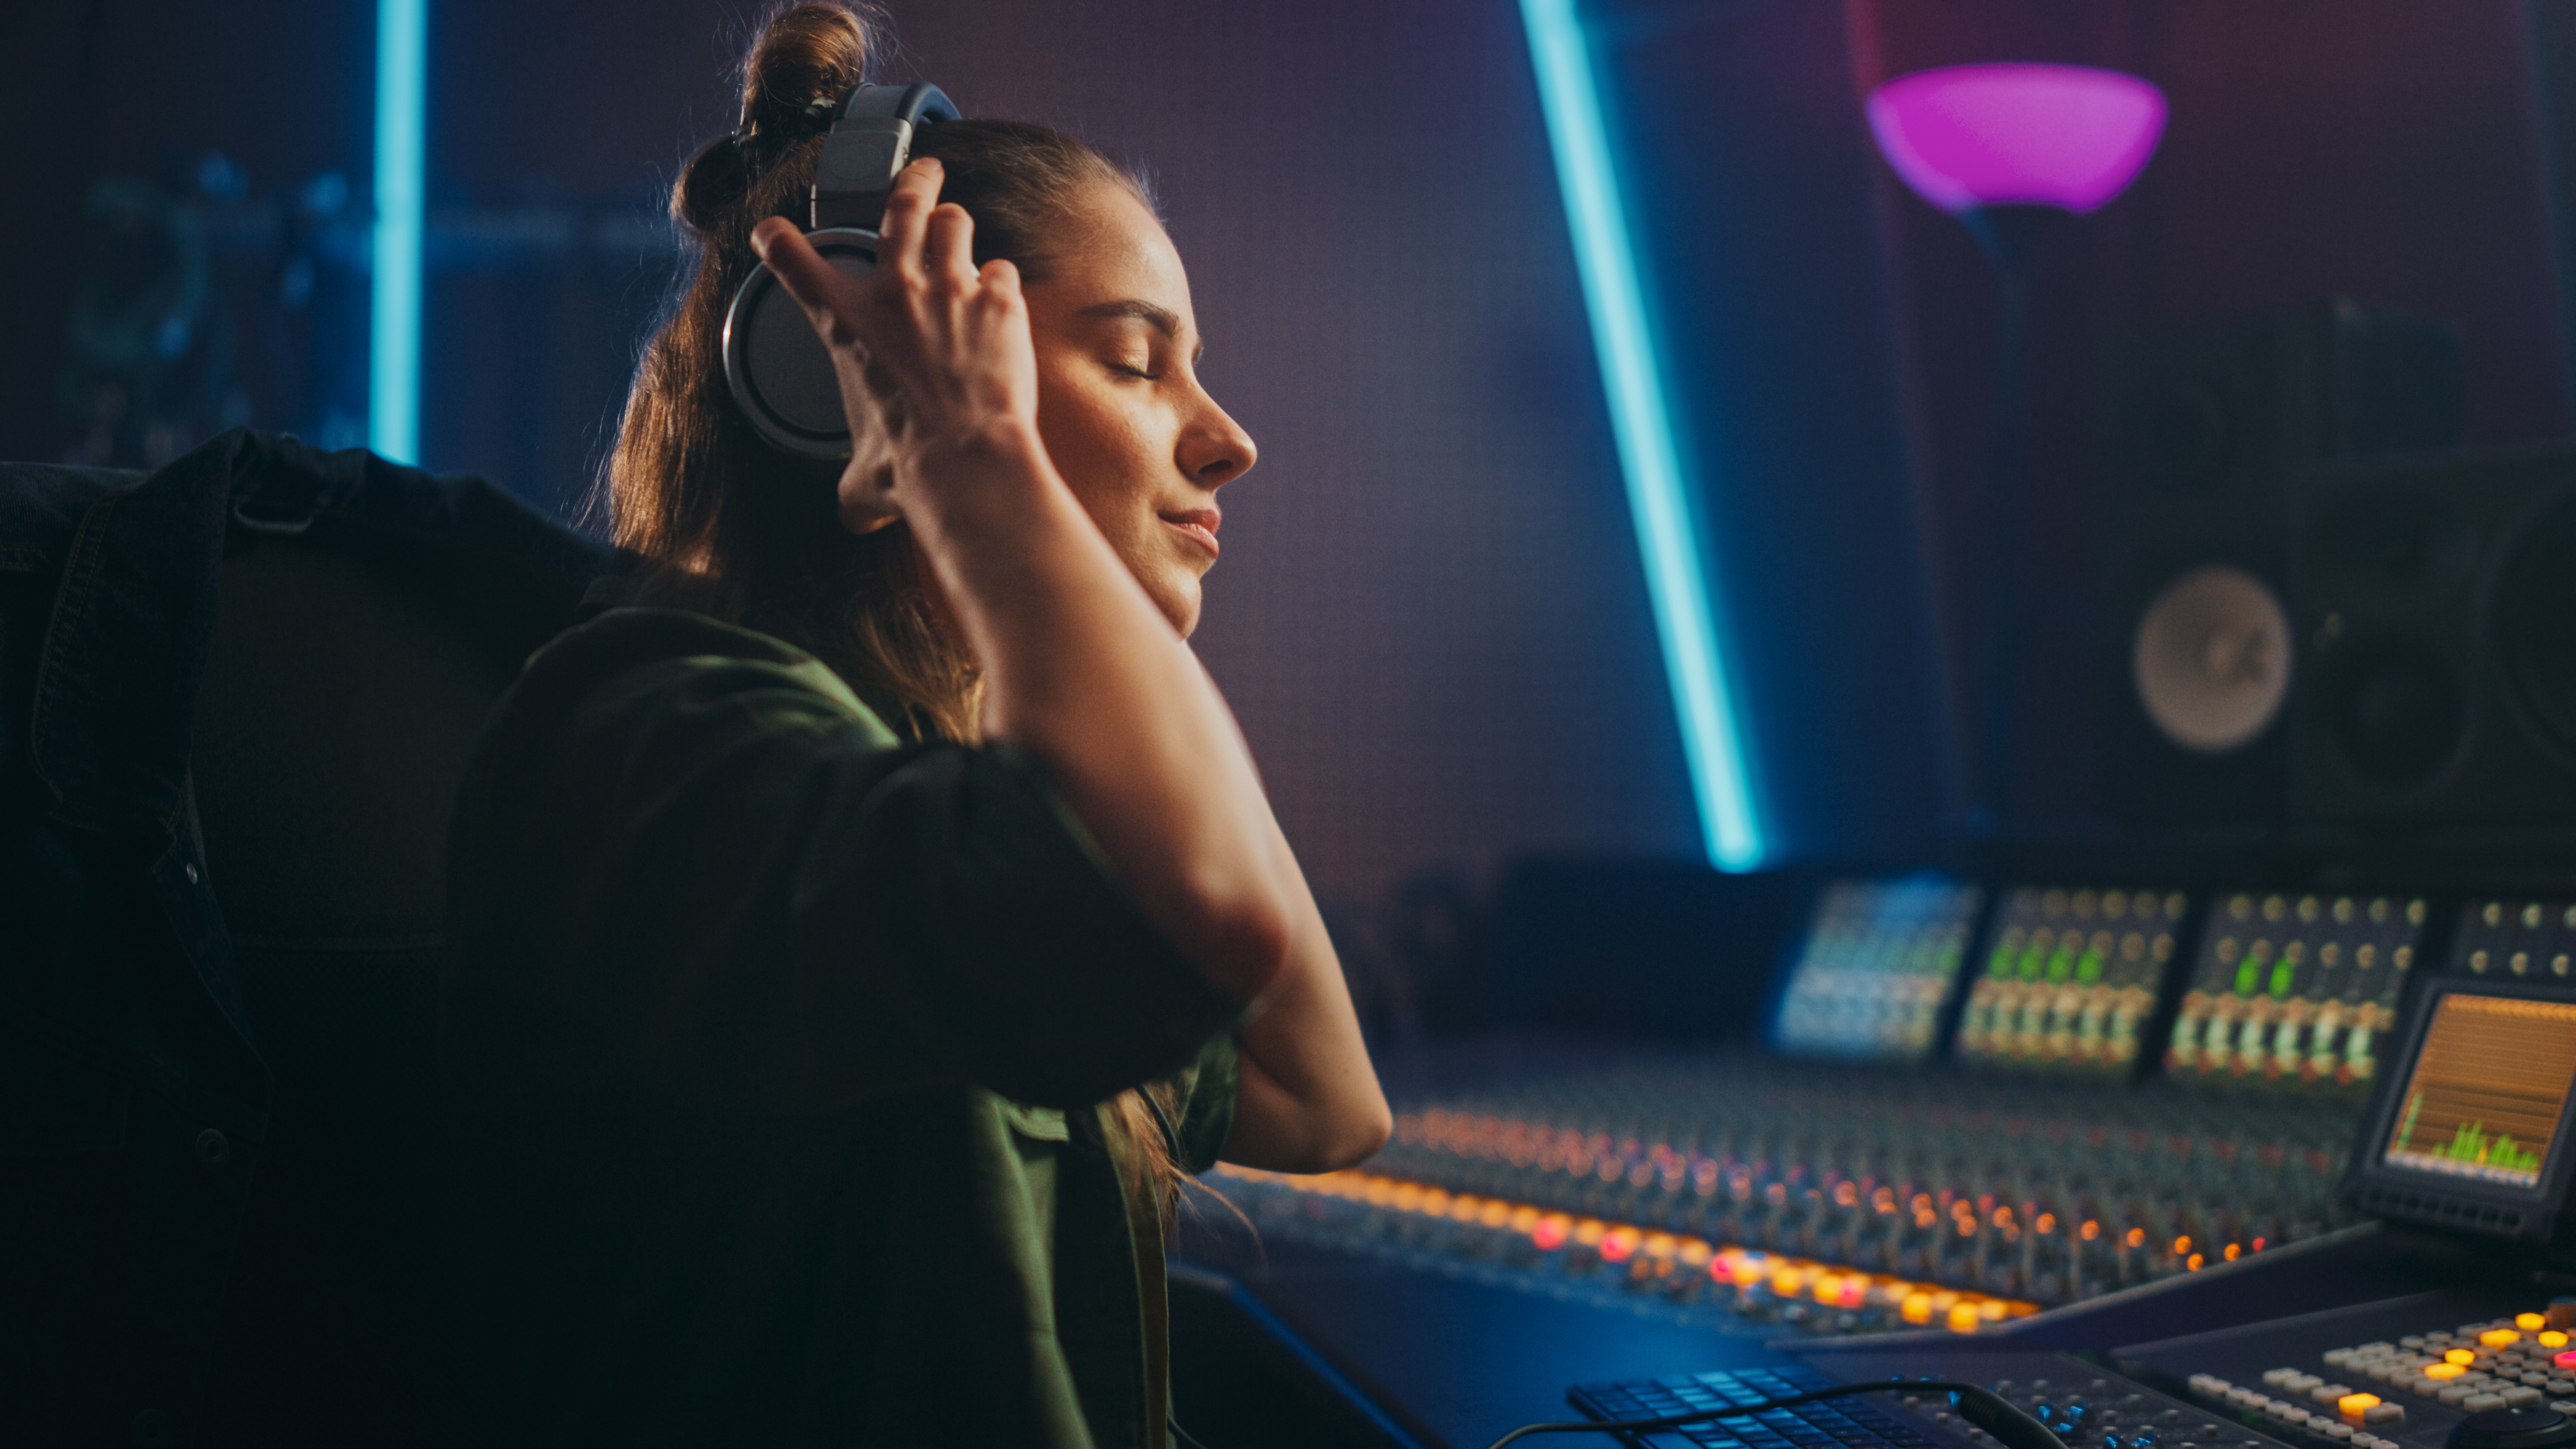 Recording Artist Listens to Music Playback as she Sits in the Studio